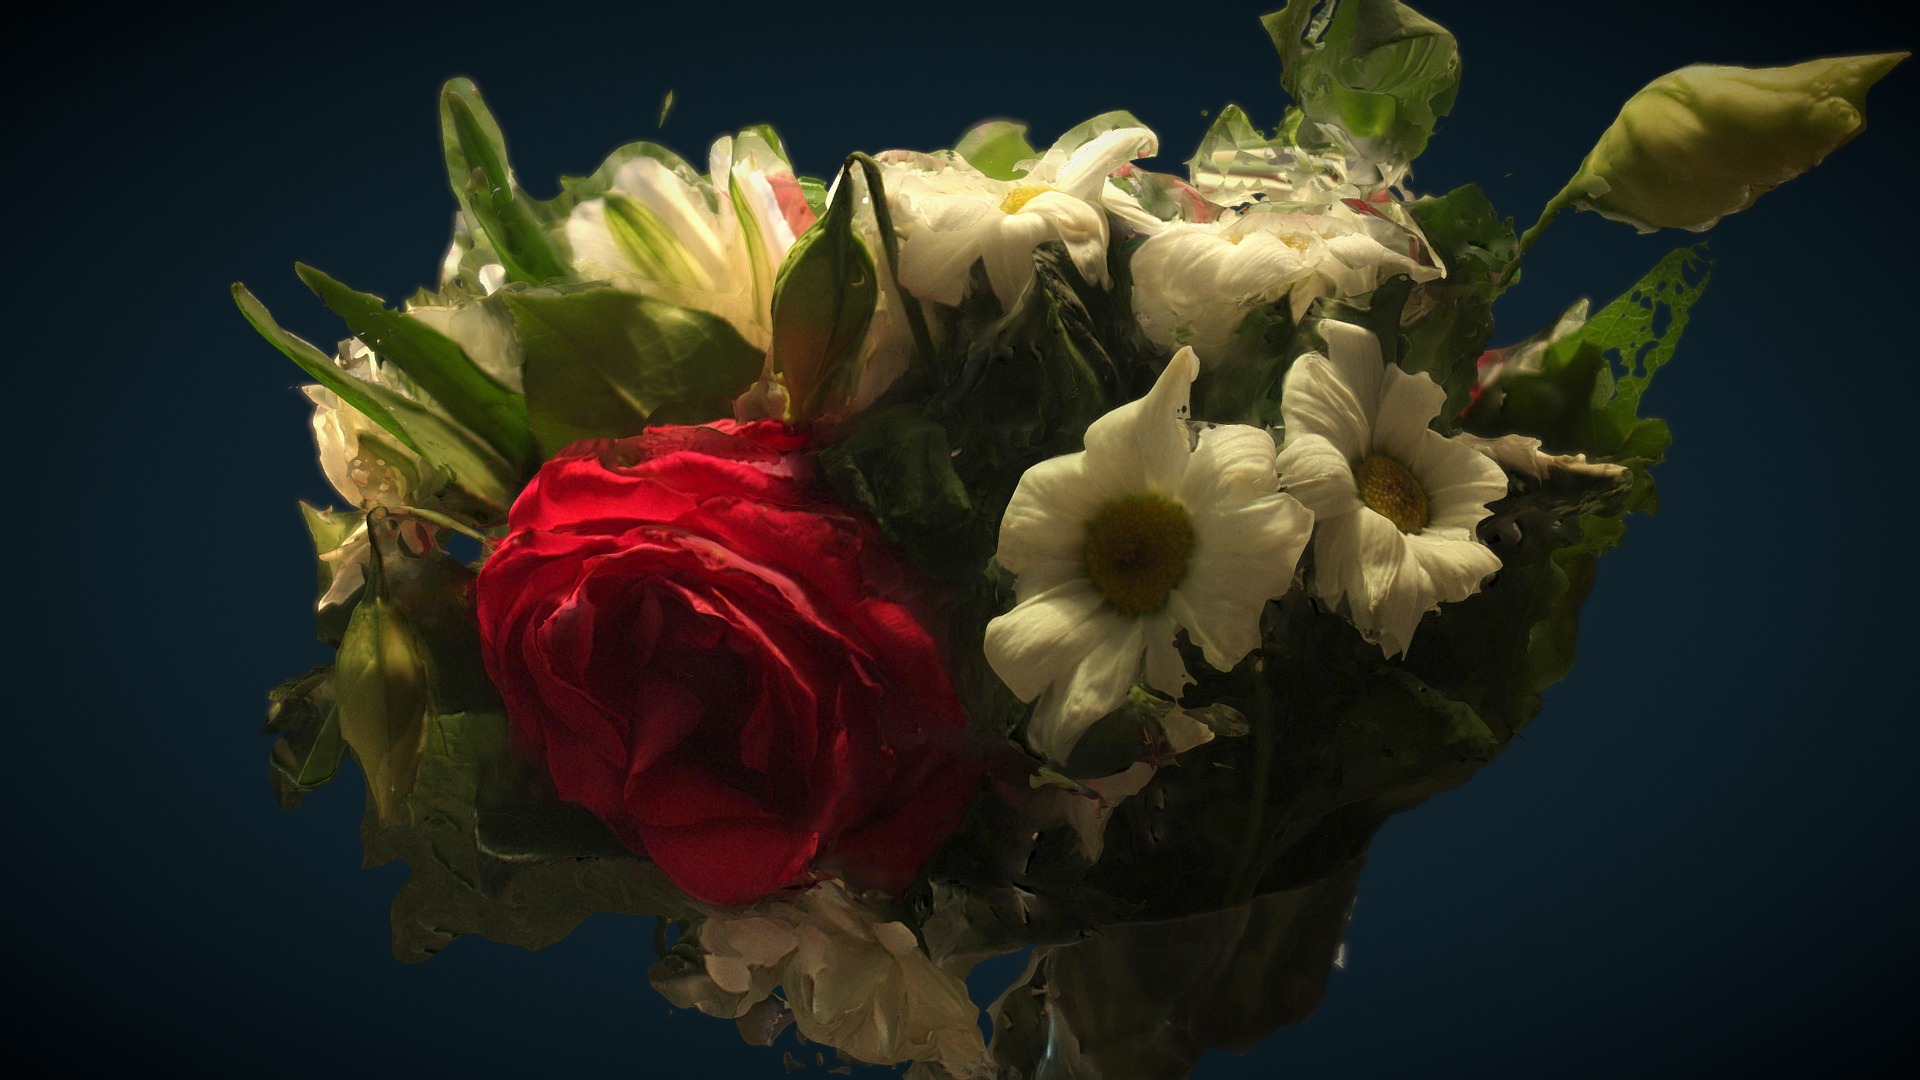 3D model Flowers 1 - This is a 3D model of the Flowers 1. The 3D model is about a bouquet of flowers.